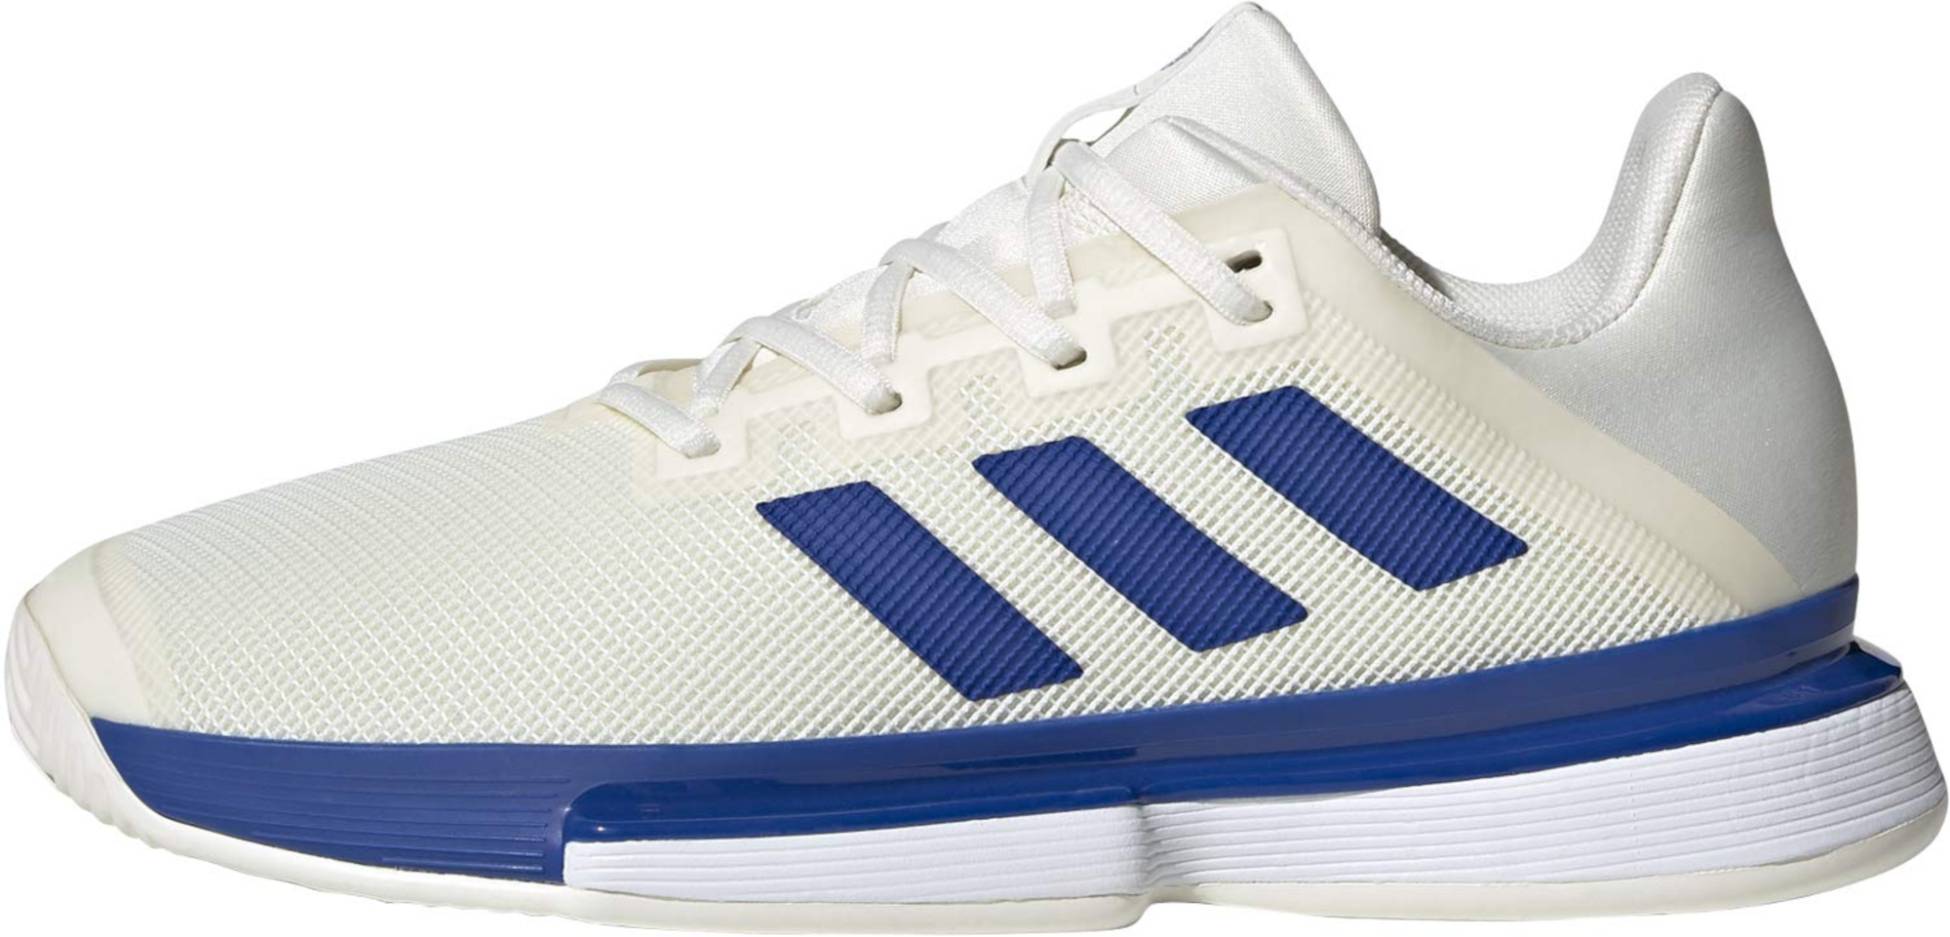 adidas bounce blue shoes